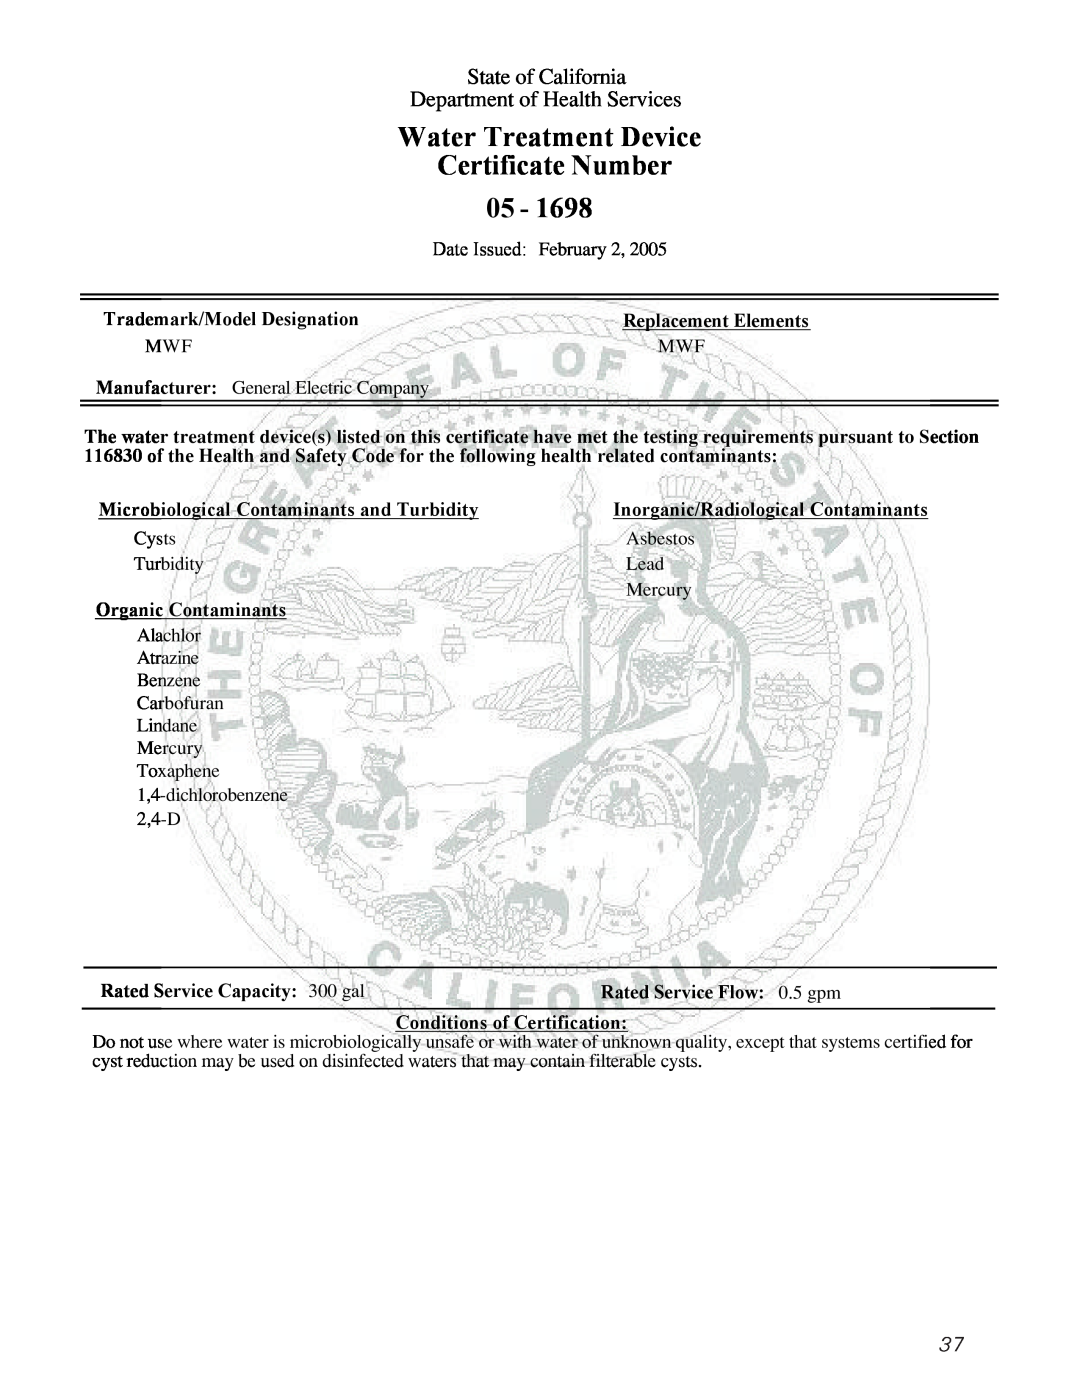 GE Monogram 23 Water Treatment Device, State of California, Department of Health Services, Certificate Number, 05 